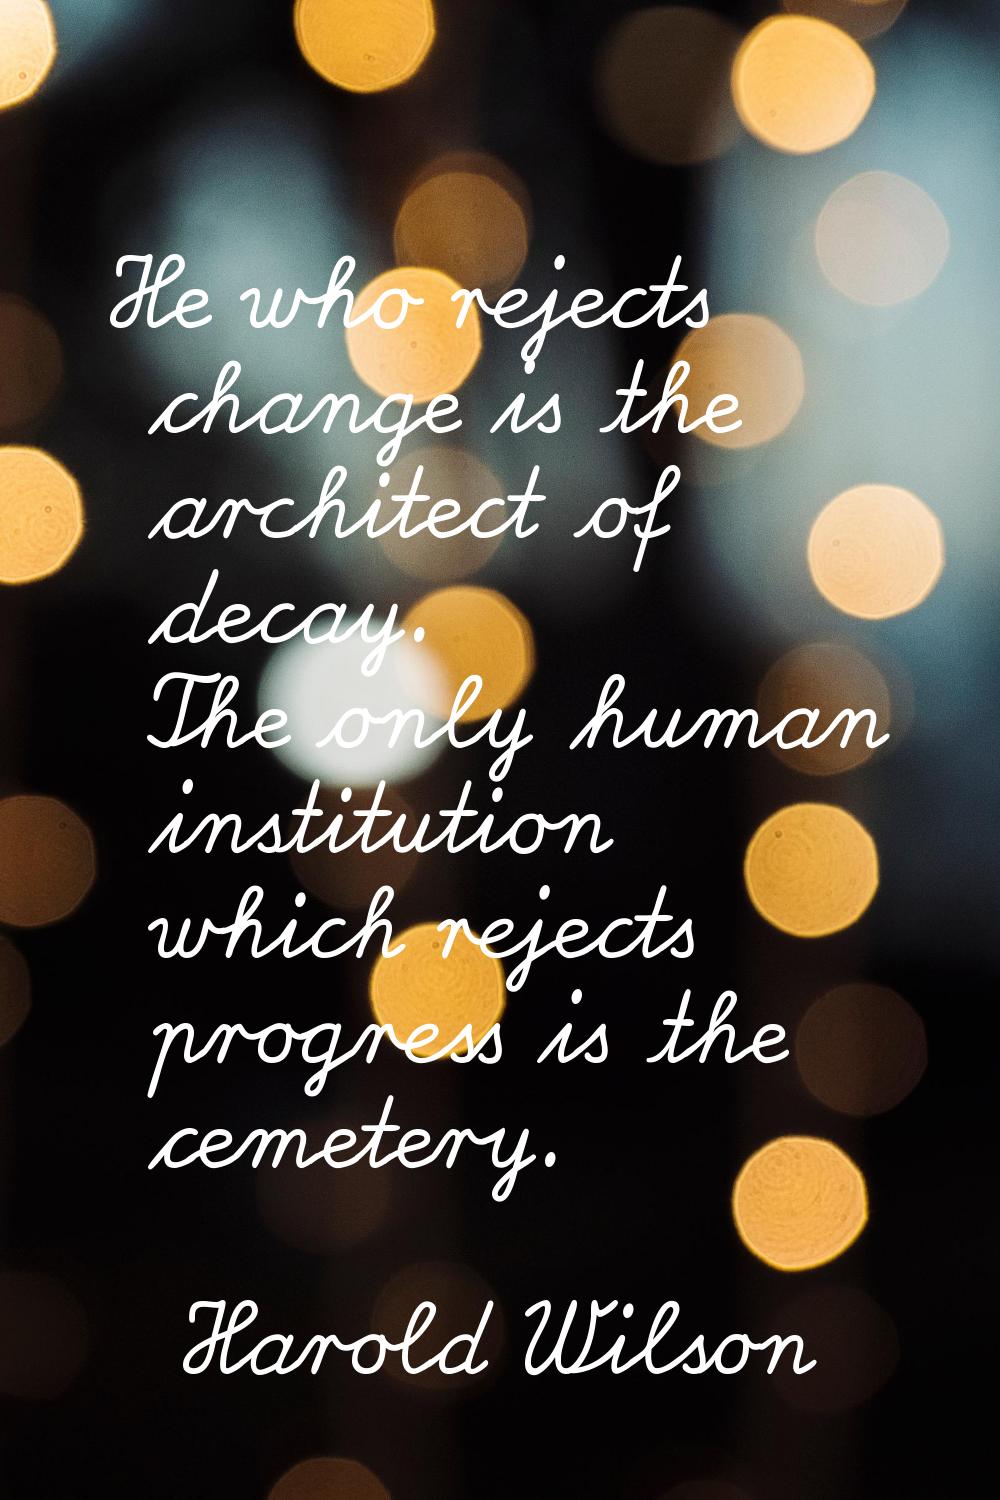 He who rejects change is the architect of decay. The only human institution which rejects progress 